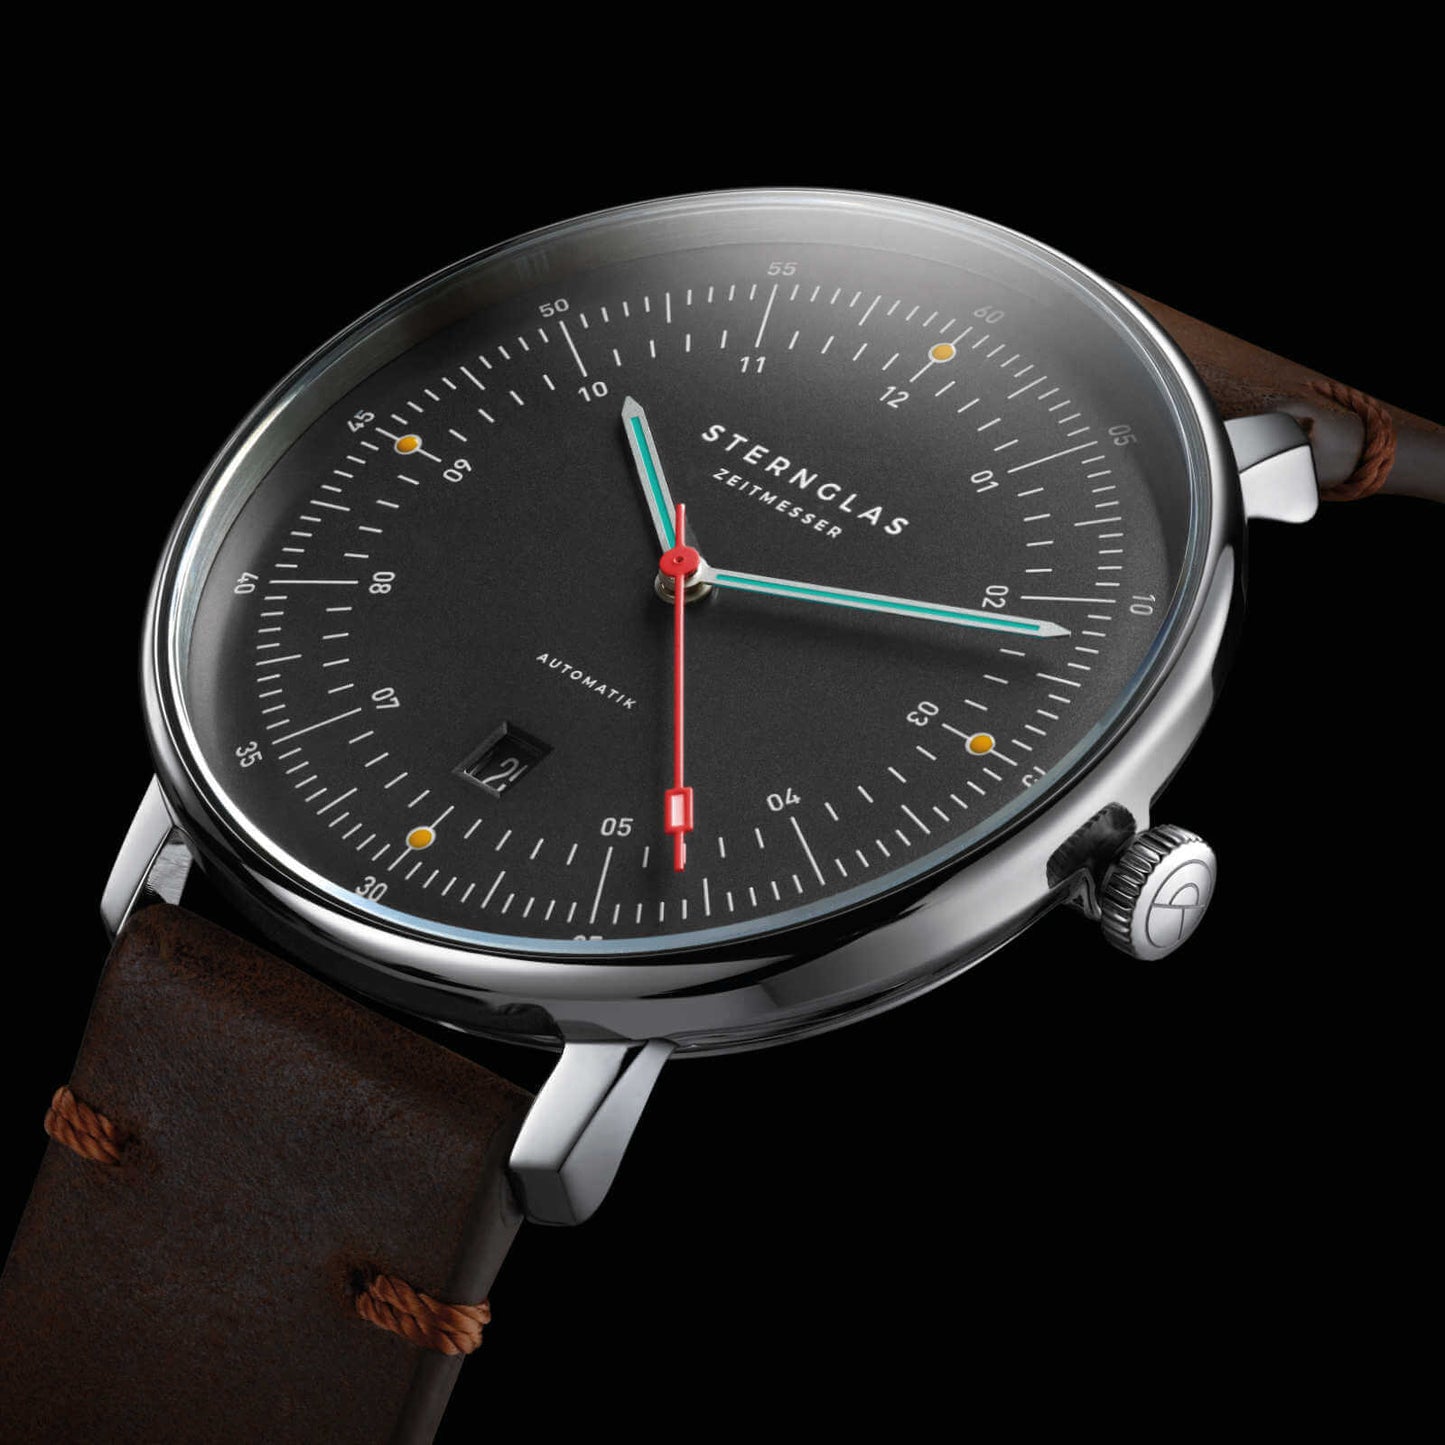 popup|Japanese mechanics|The 8215 automatic movement from the Japanese manufacturer Miyota is considered to be particularly low-maintenance and durable. 